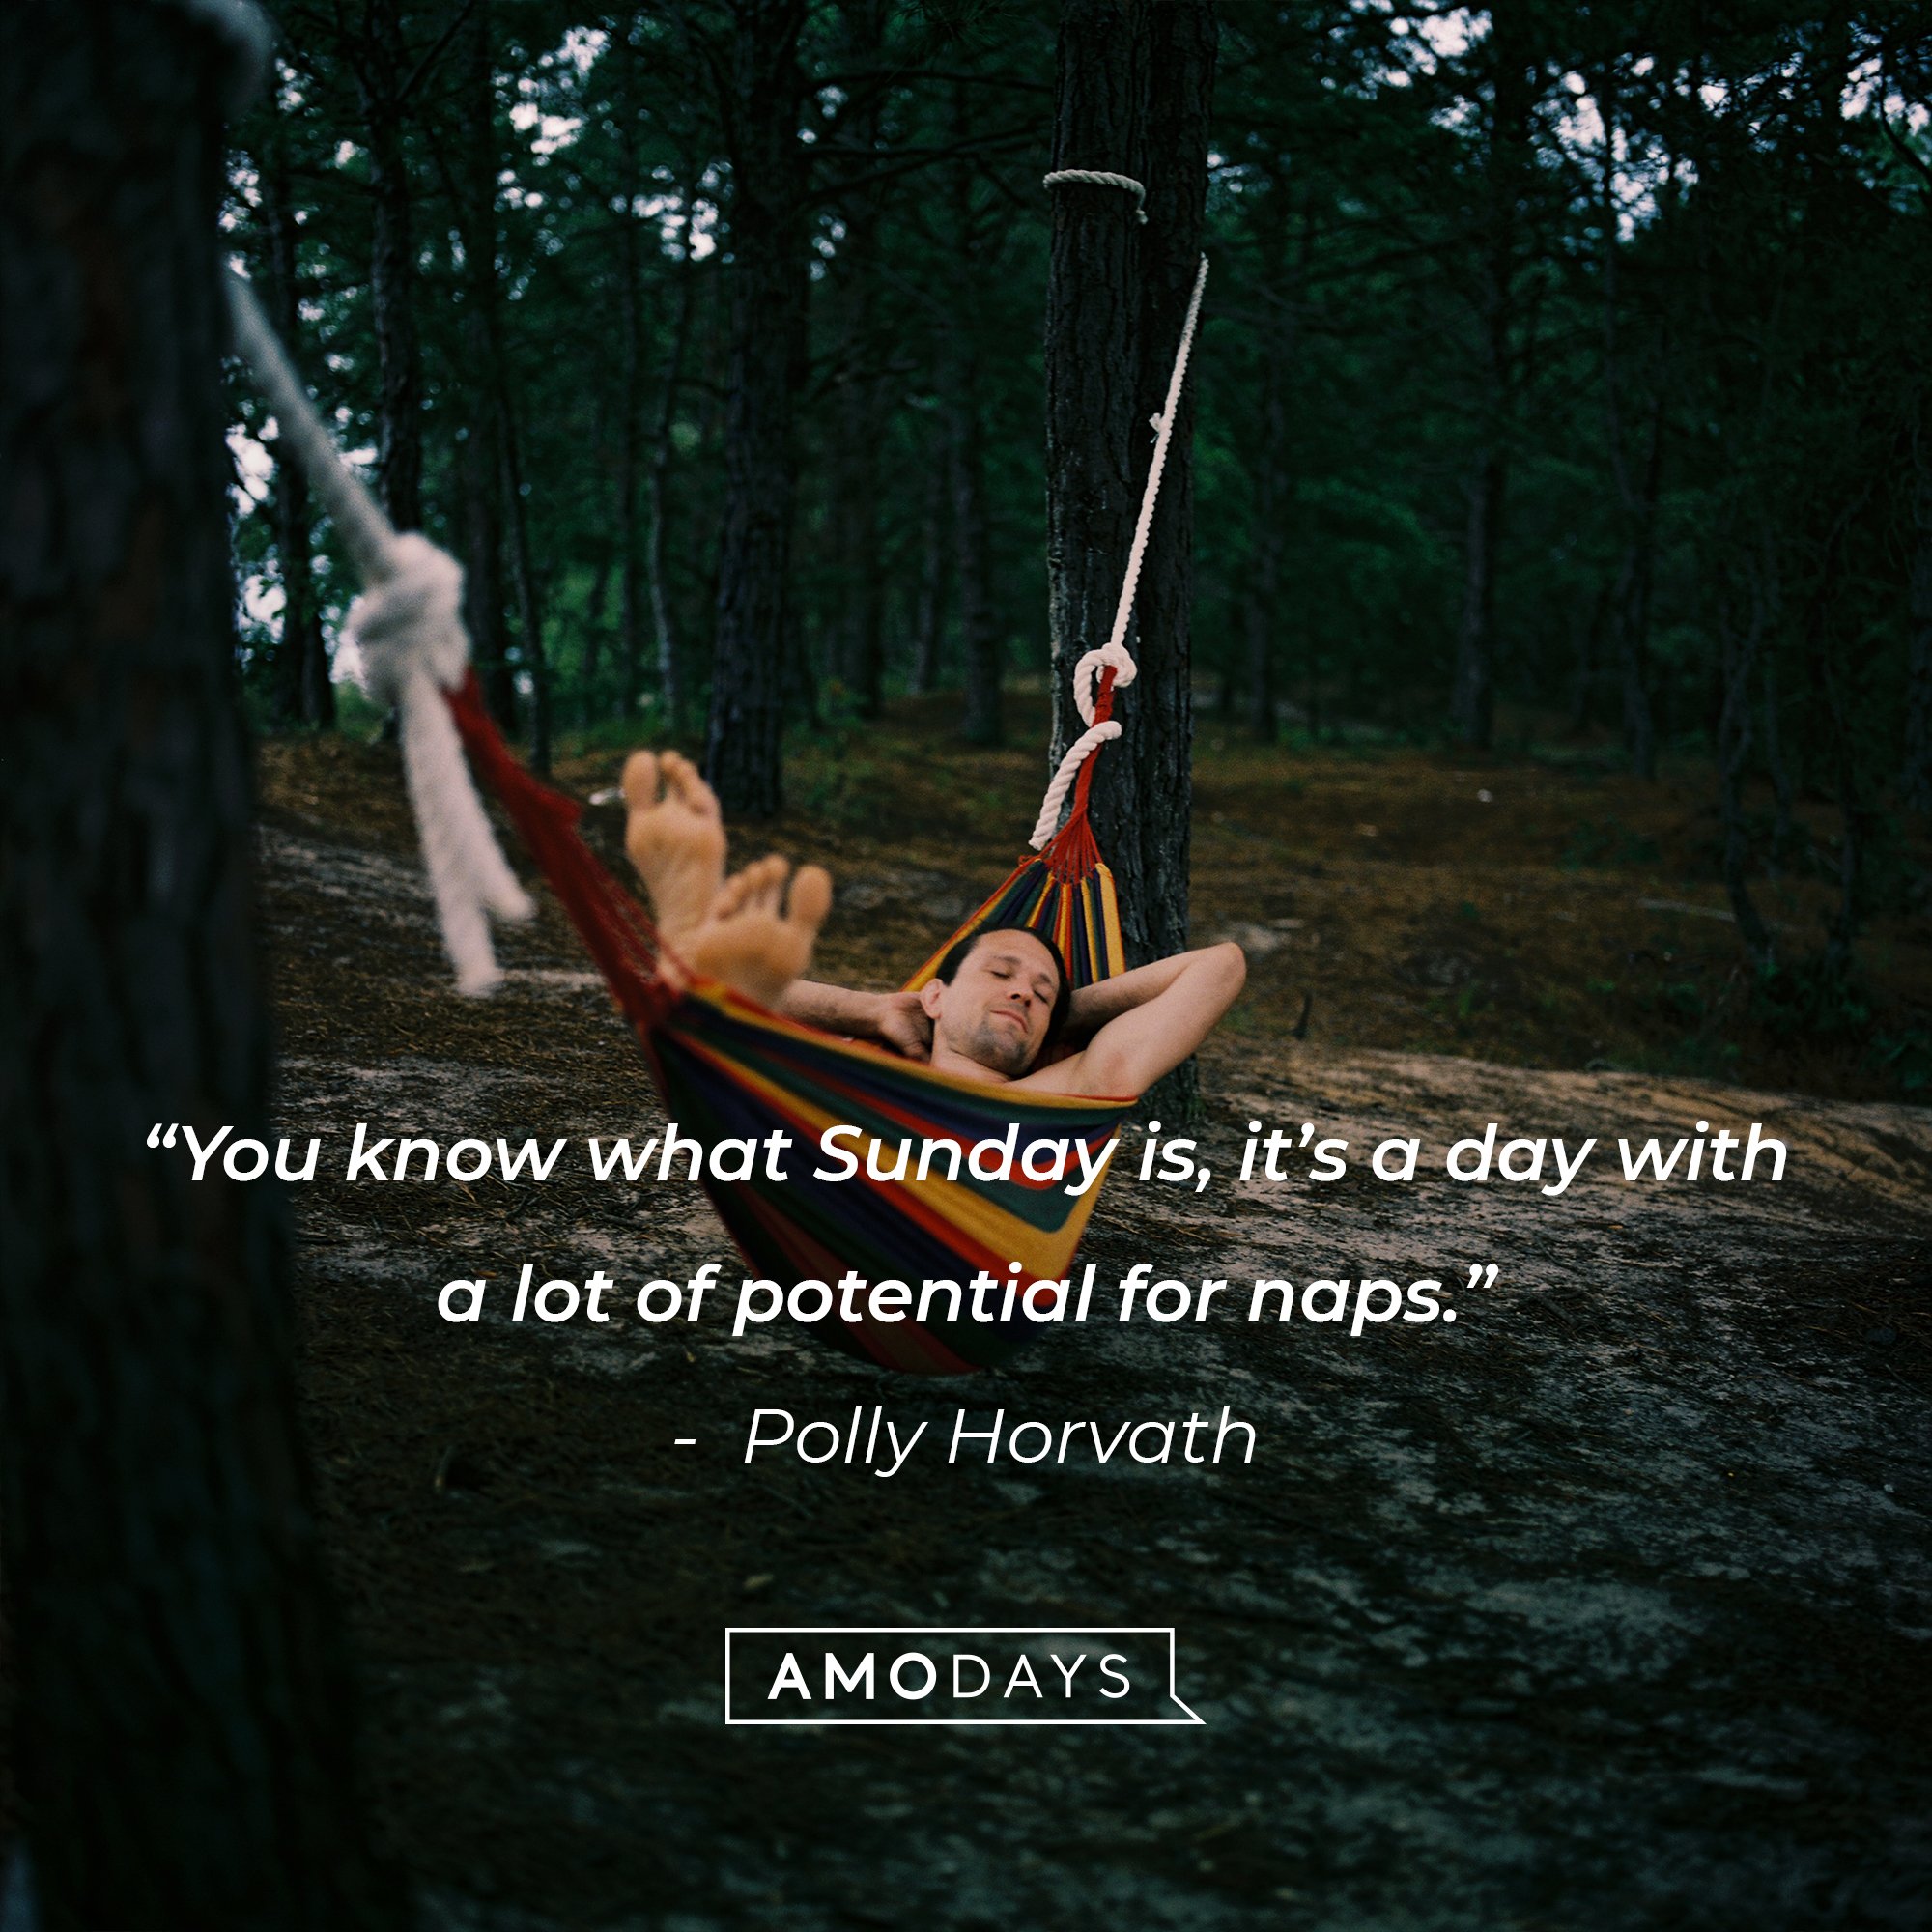 Polly Horvath's quote: “You know what Sunday is, it’s a day with a lot of potential for naps.” | Image: AmoDays